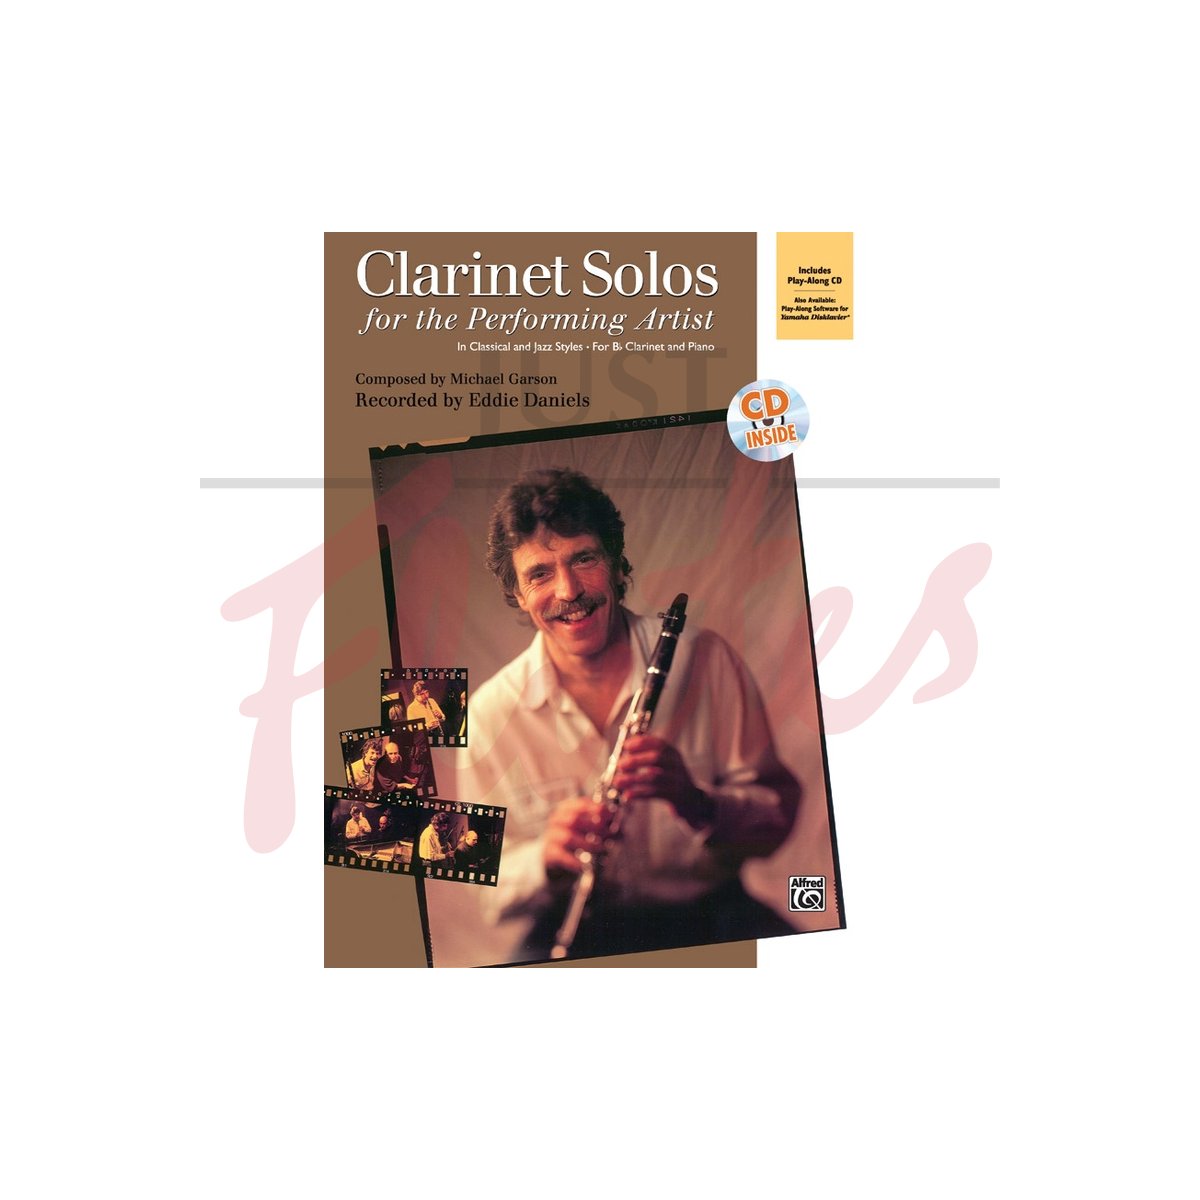 Clarinet Solos for the Performing Artist